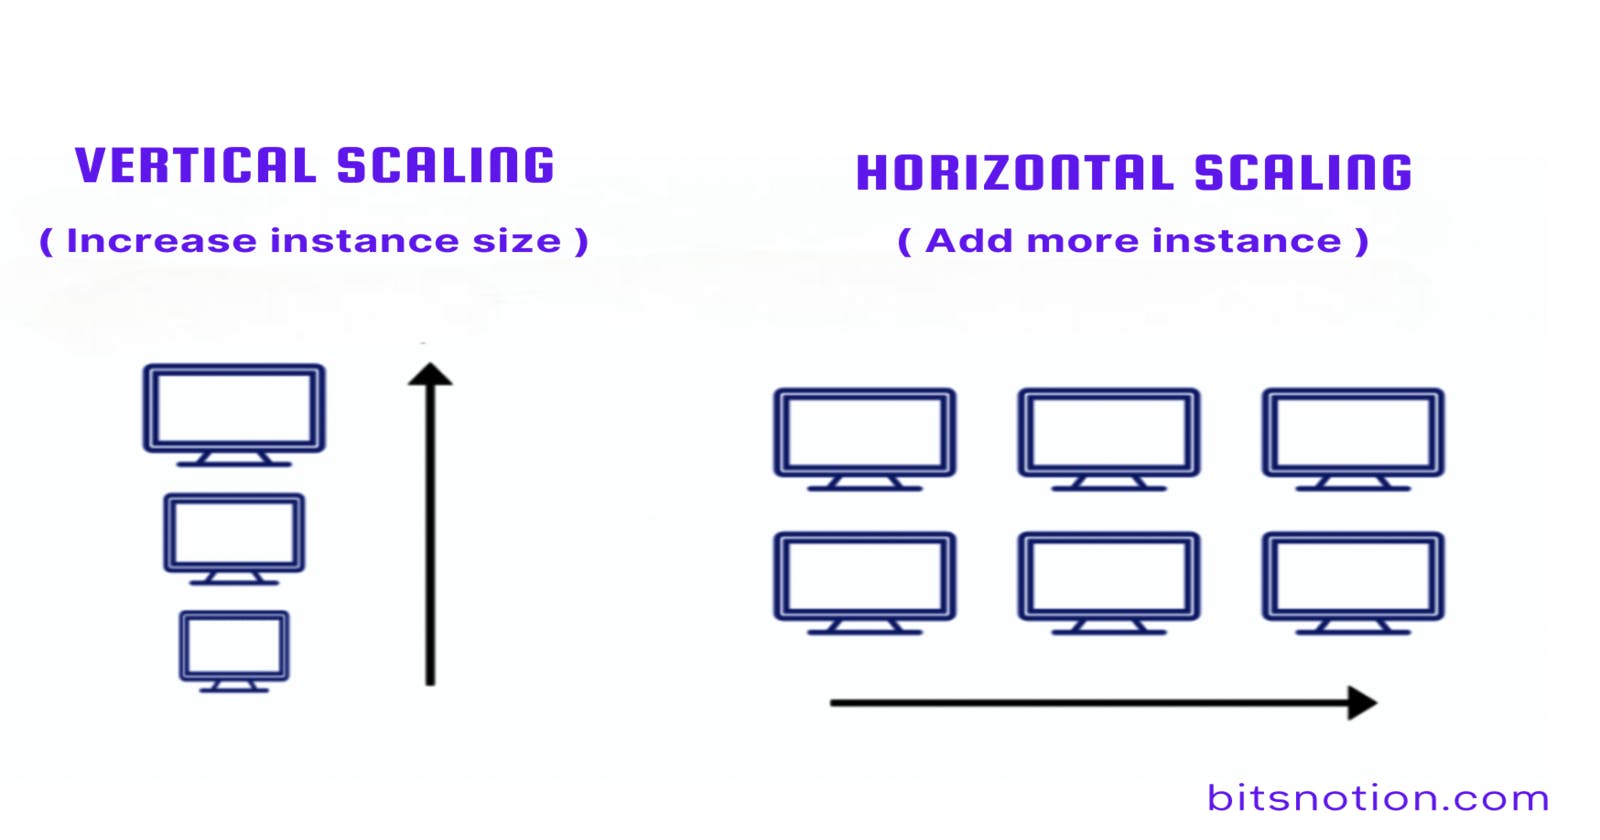 Horizontal scaling and Vertical scaling